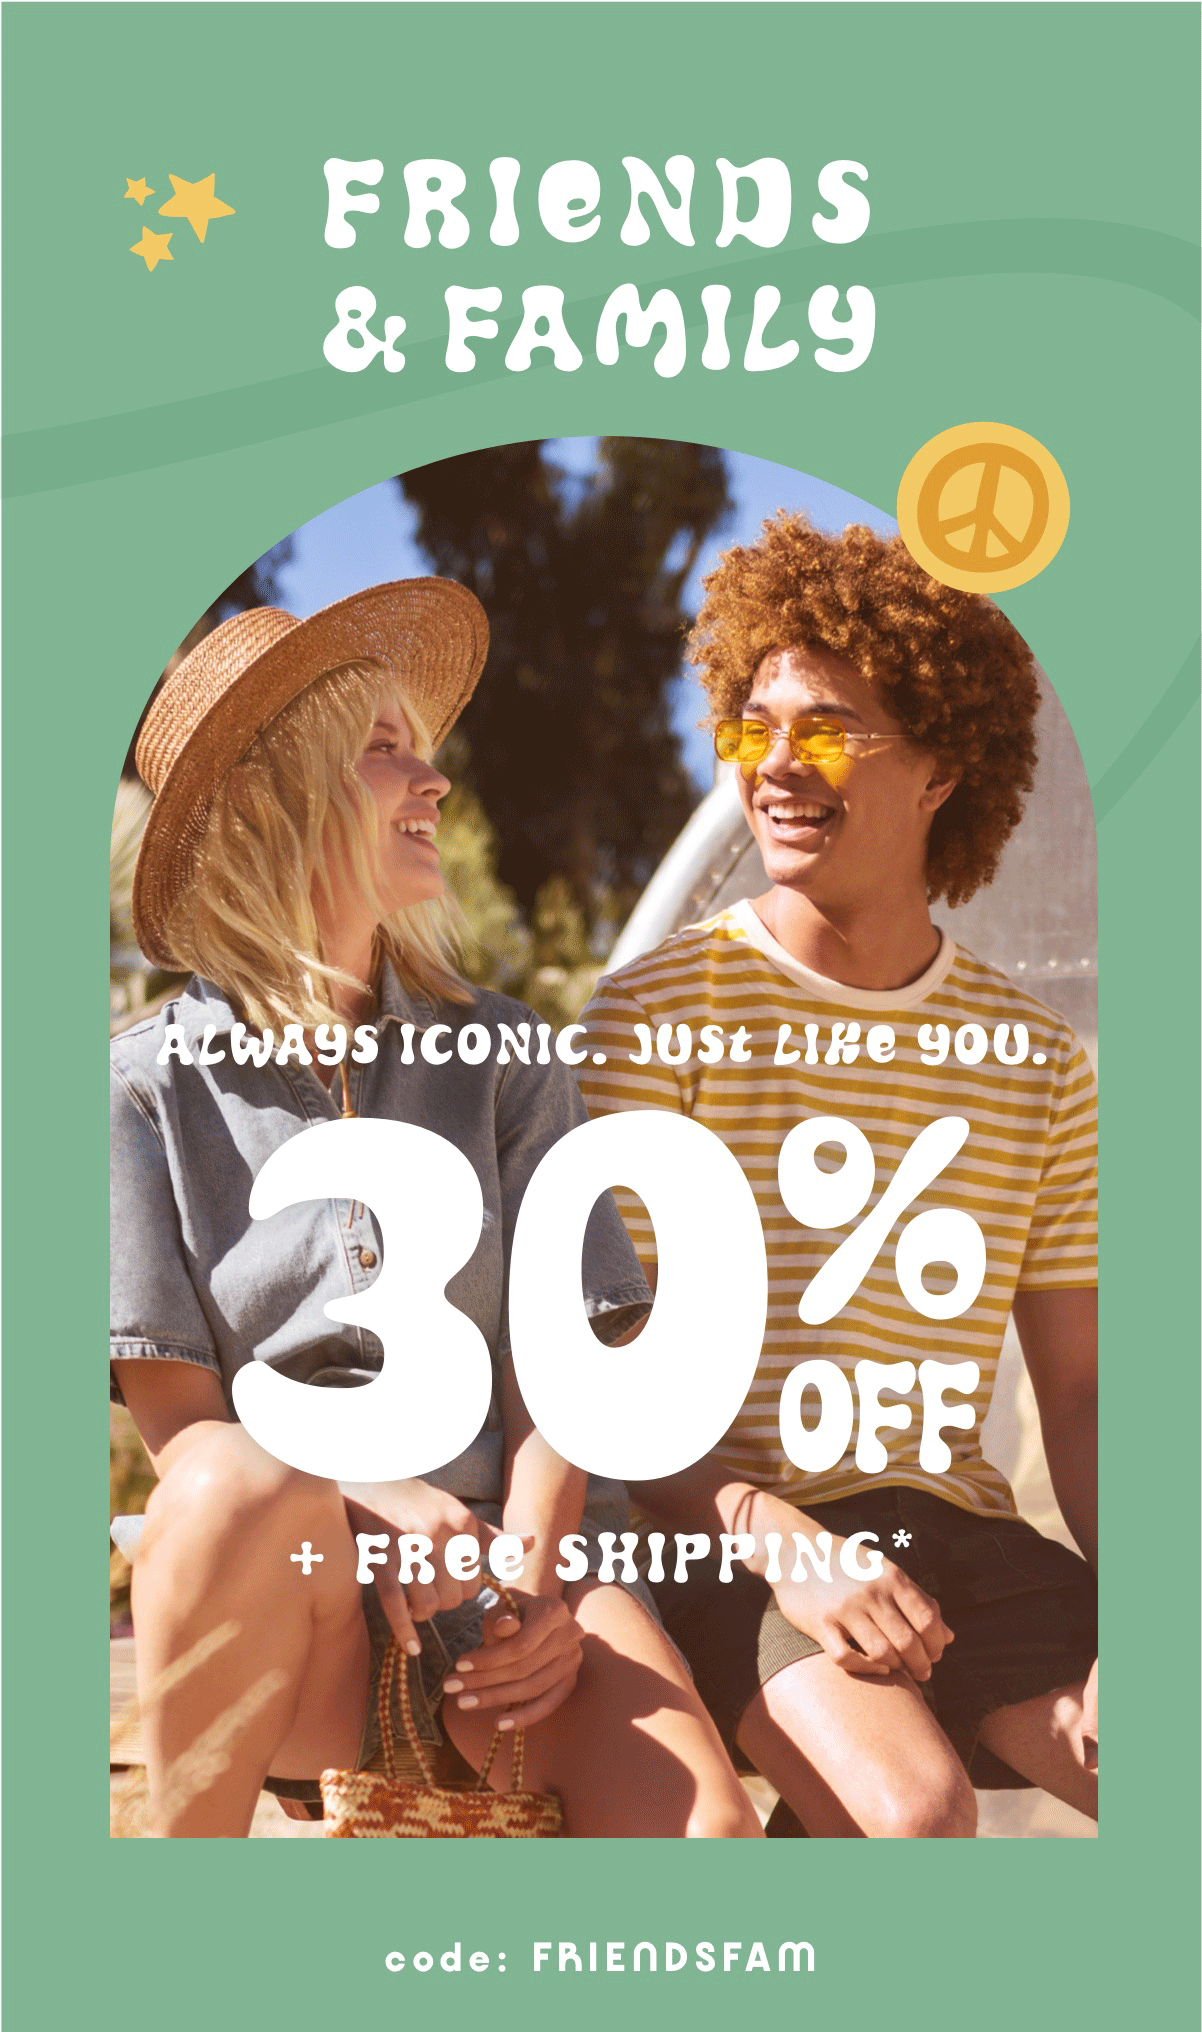 Friends & Family | Always Iconic. Just Like You. 30% Off + Free Shipping* Code: FRIENDSFAM